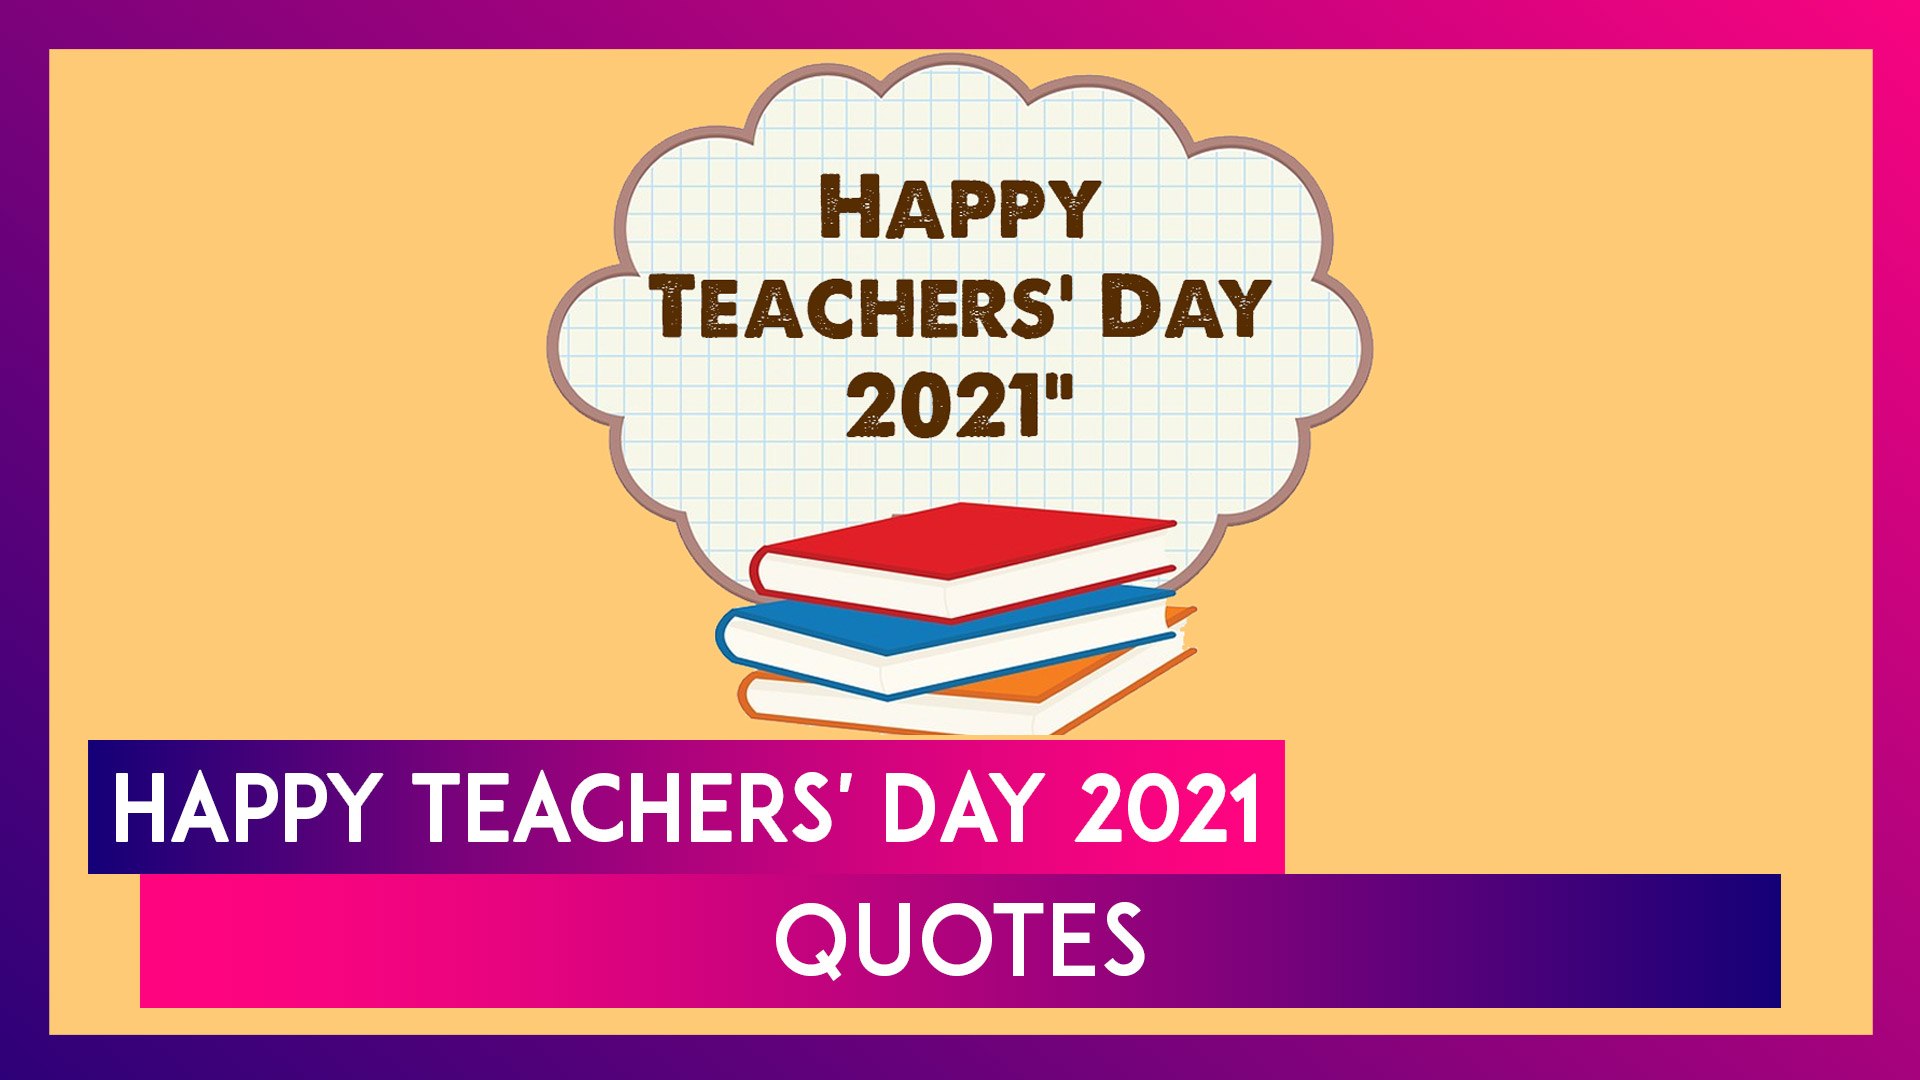 Teachers' Day 2021: Inspirational Quotes & Sayings About Teachers and Teaching To Celebrate the Day